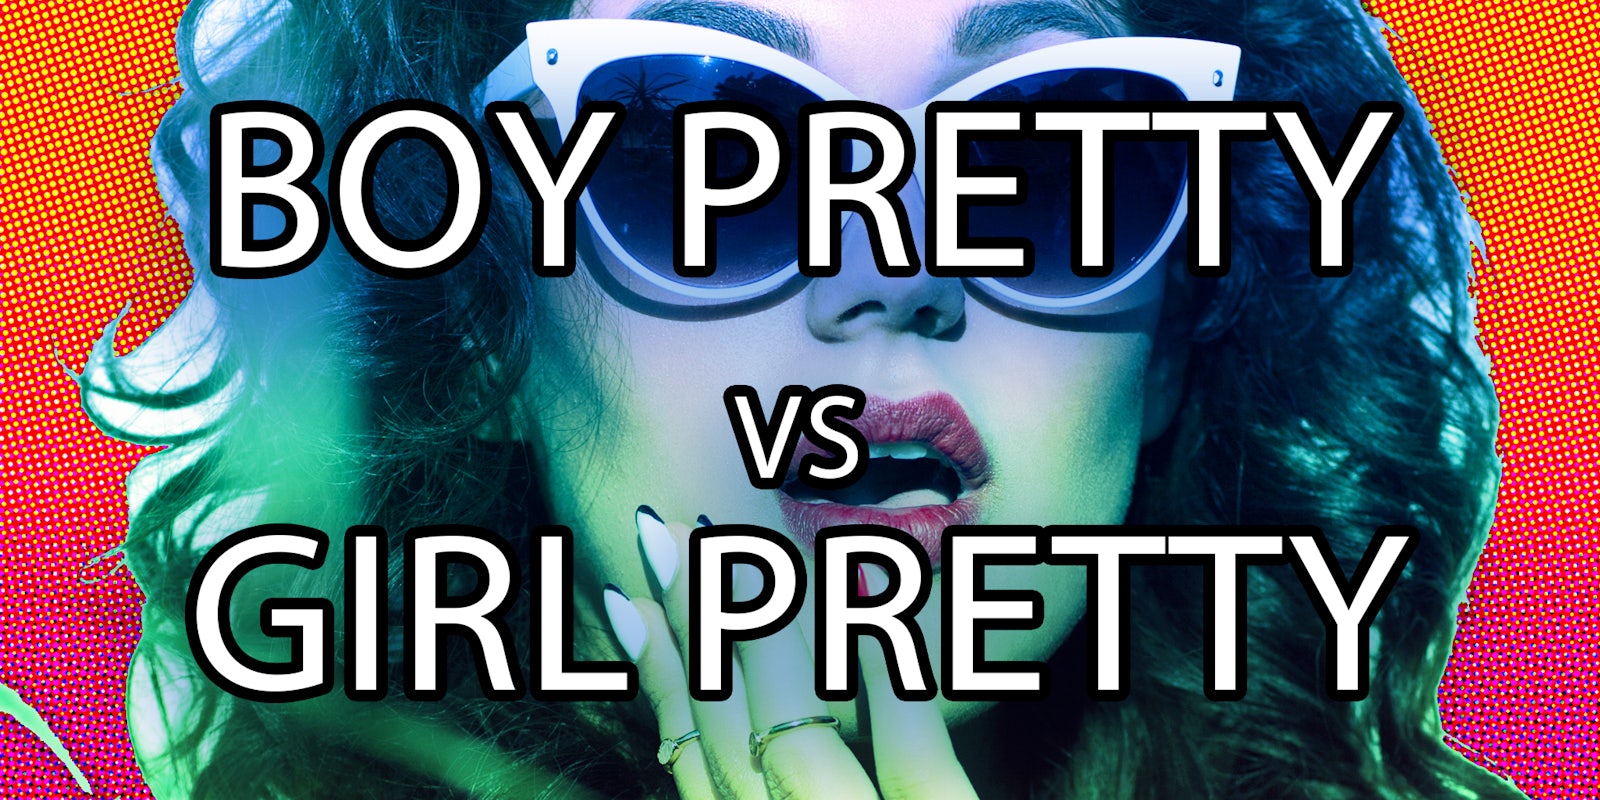 Woman with hand by her mouth and text that says 'boy pretty vs girl pretty'